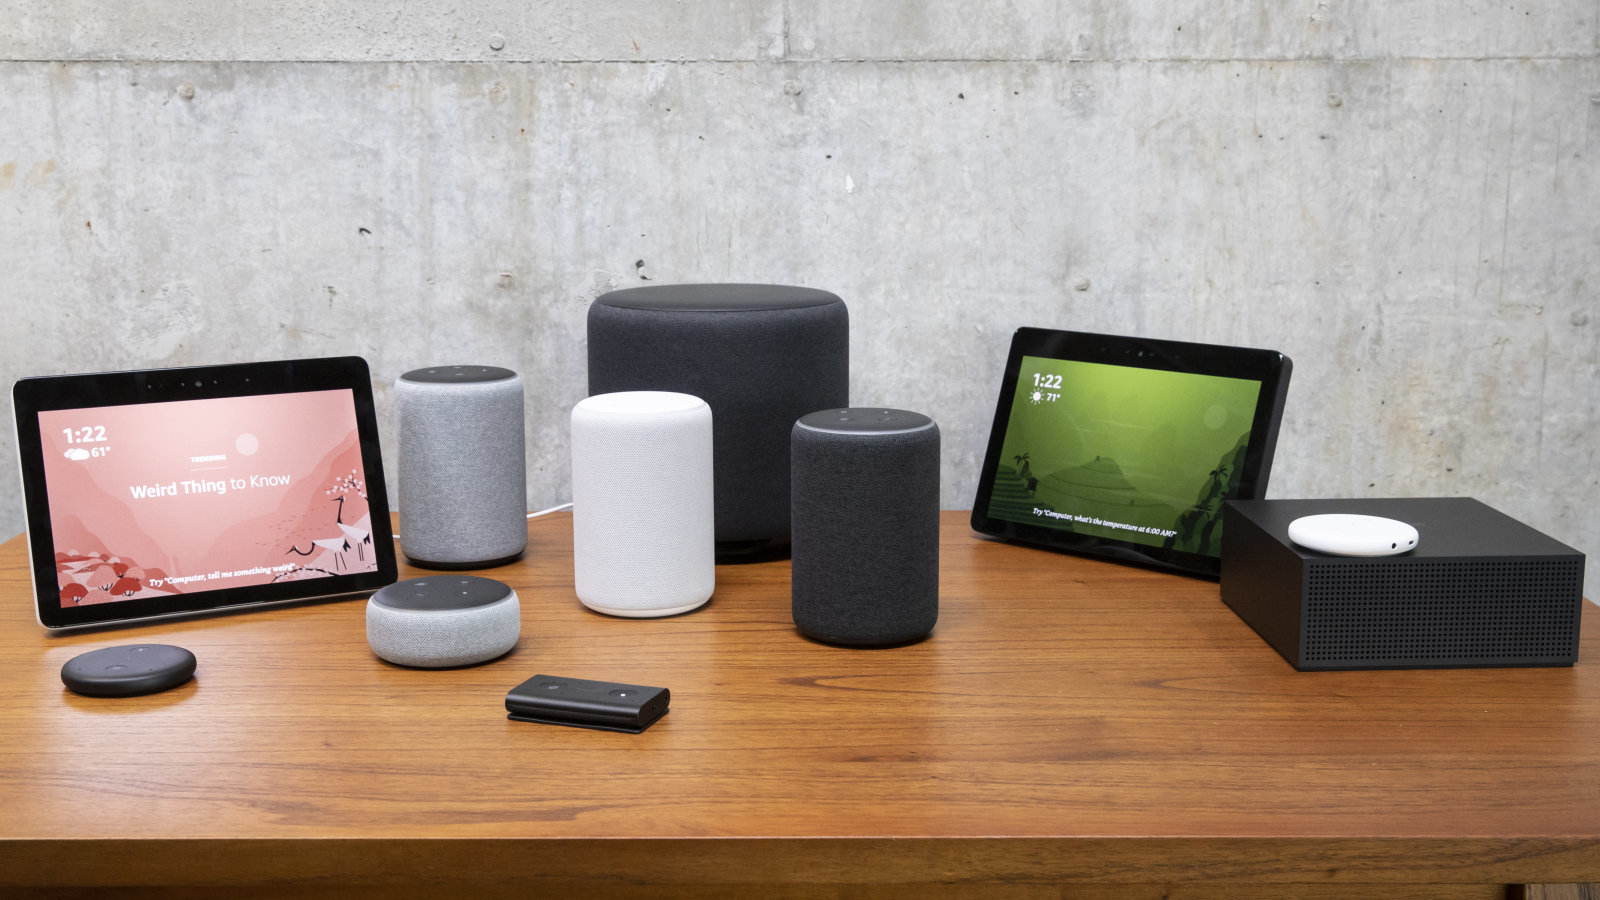 SEATTLE, WA - SEPTEMBER 20: An assortment of newly launched devices, including, an "Echo Input," "Echo Show, "Echo Plus," "Echo Sub," "Echo Auto" and "Firetv Recast" are pictured at Amazon Headquarters, follownig a launch event, on September 20, 2018 in Seattle Washington. Amazon launched more than 70 Alexa-enable products during the event. (Photo by Stephen Brashear/Getty Images)